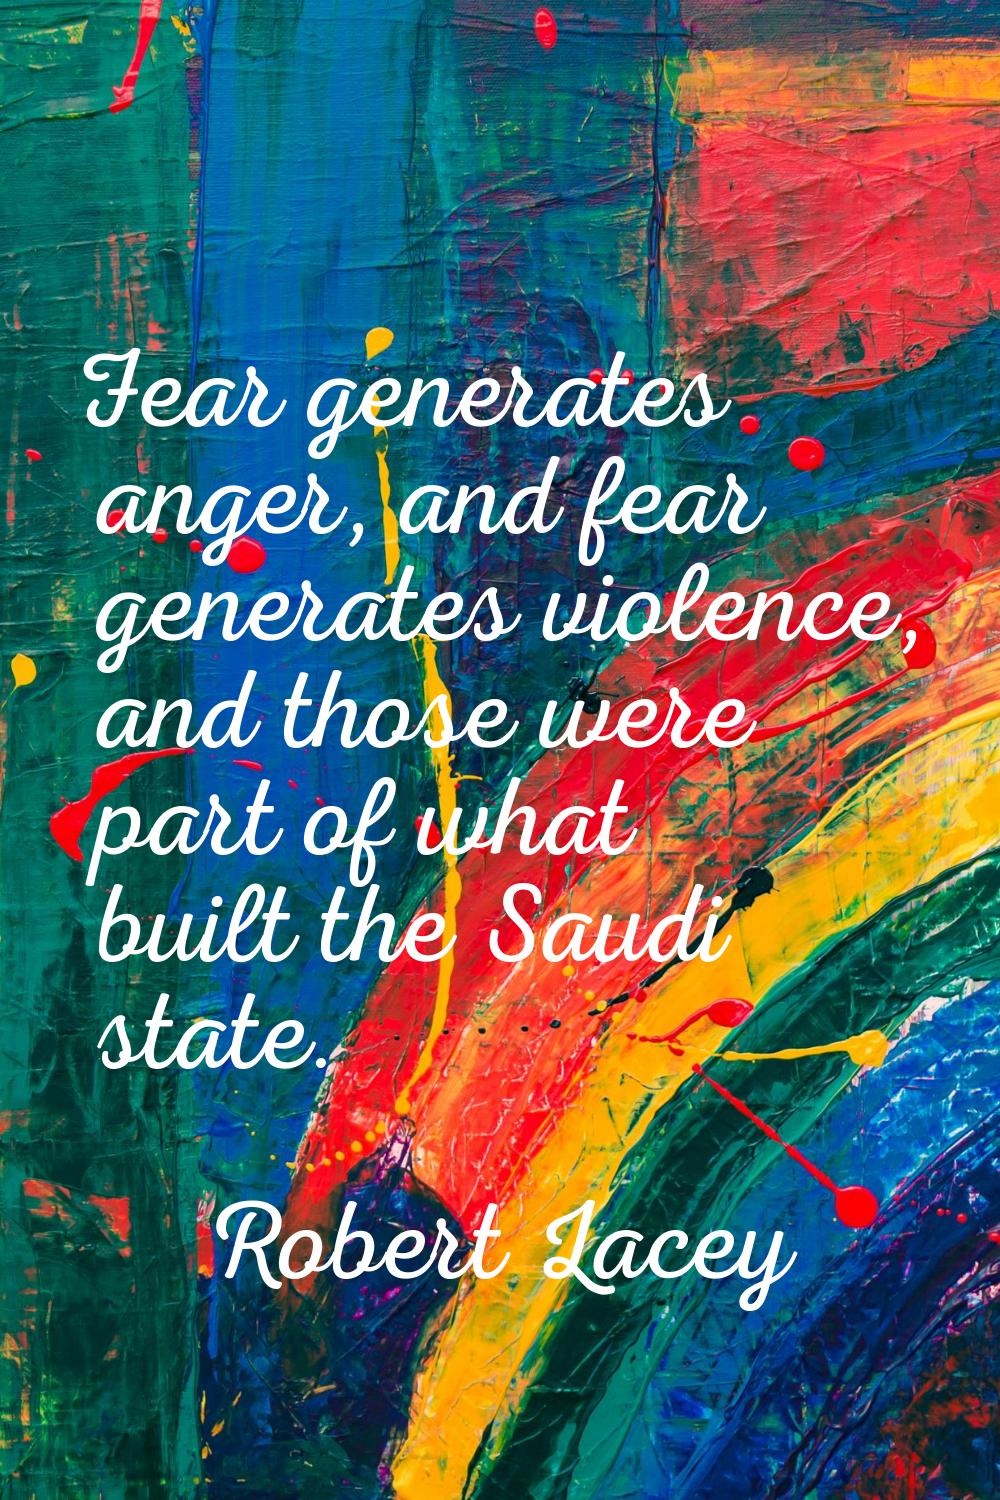 Fear generates anger, and fear generates violence, and those were part of what built the Saudi stat